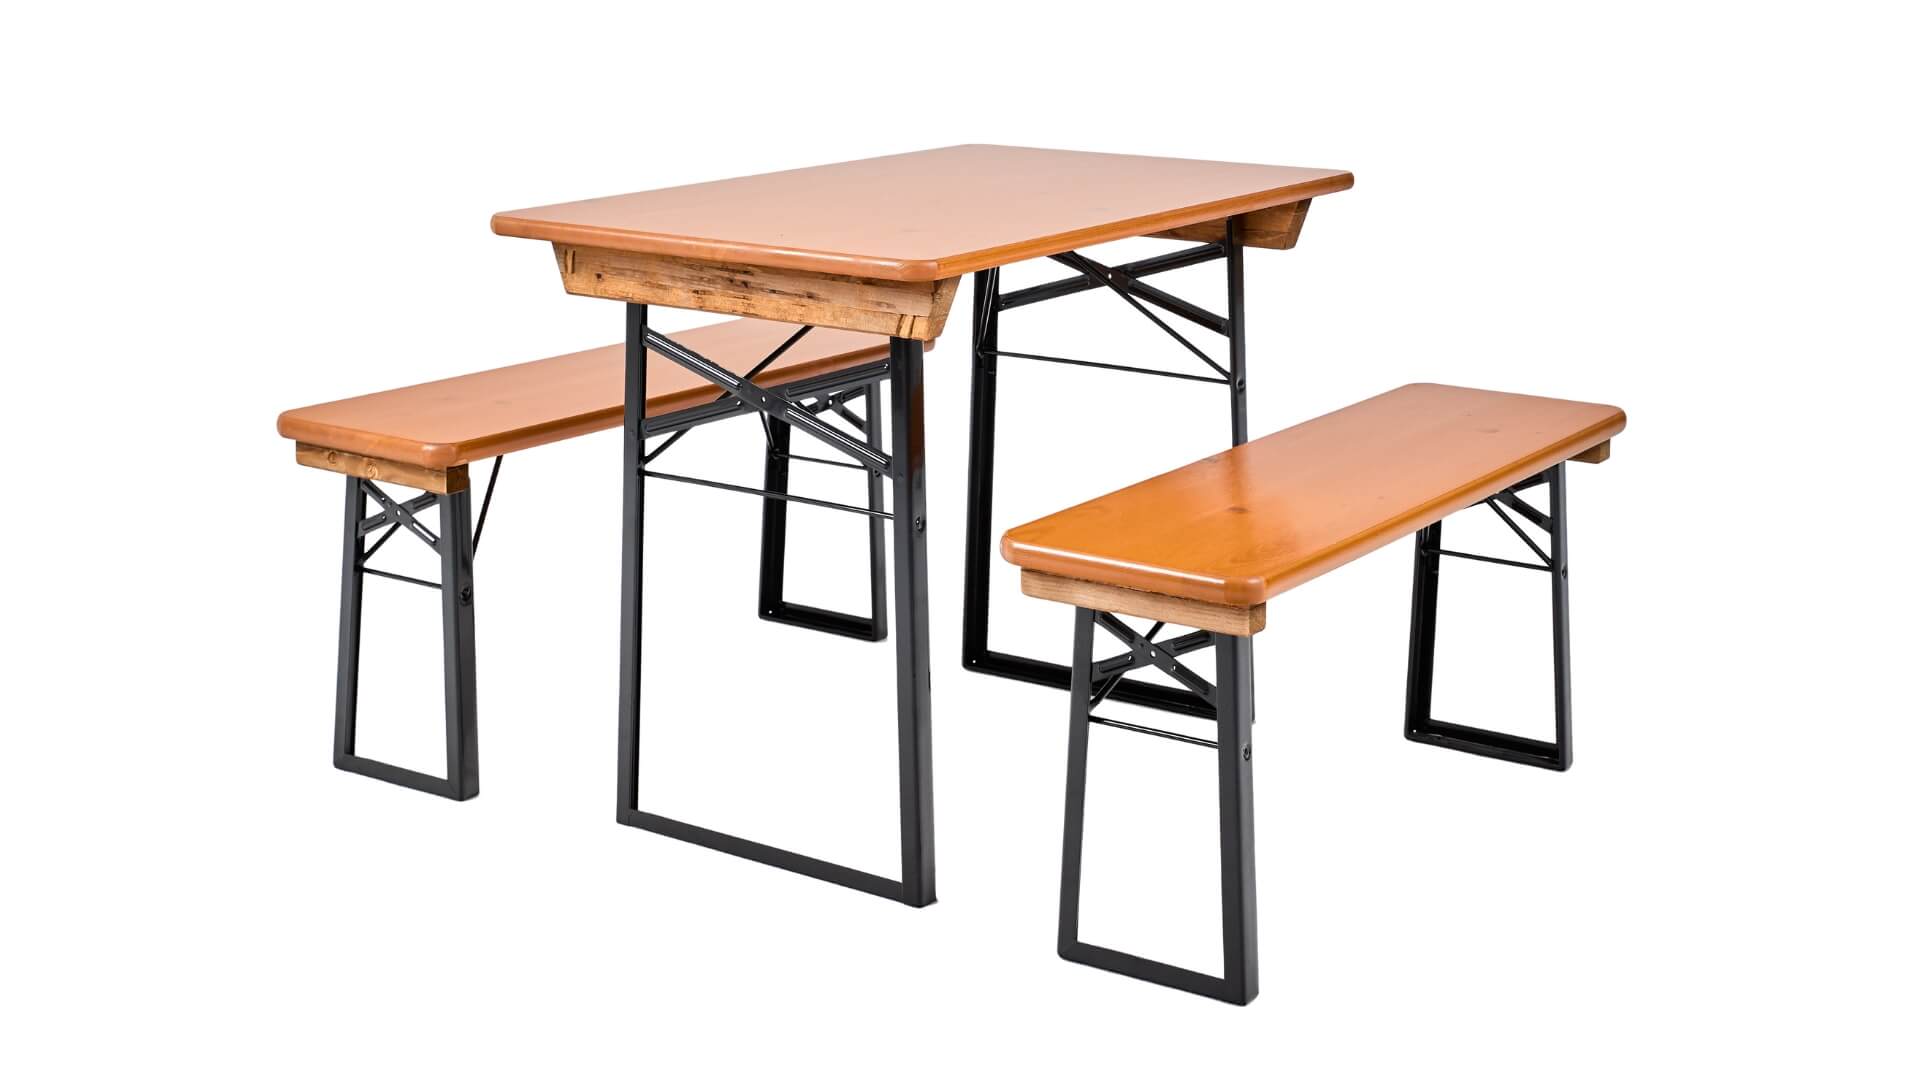 The small beer garden table sets Shorty in the color pine.